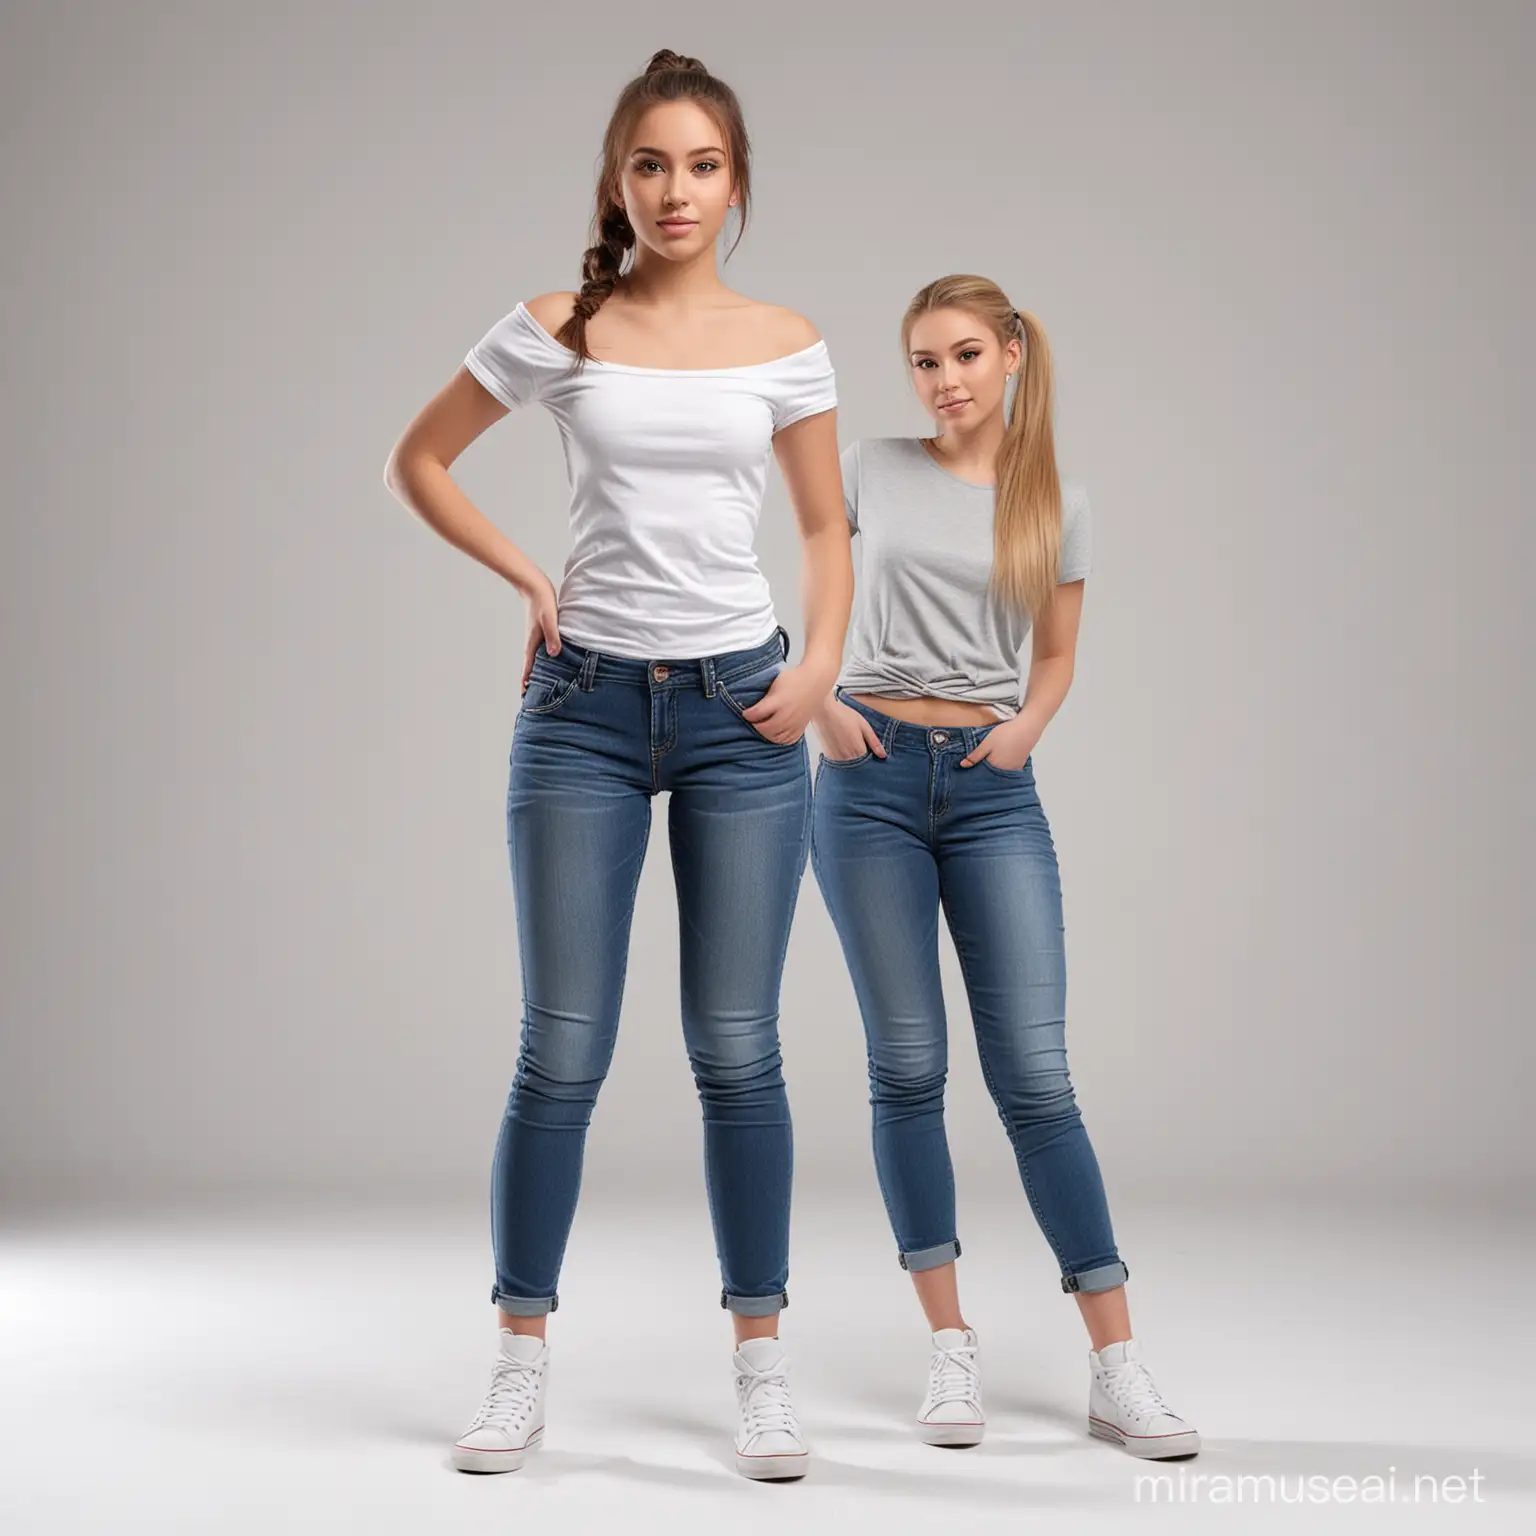 A standing photorealistic attractive woman 18 years old with ponytails in jeans and a smooth T -shirt without pockets and strapless, full body front view including shoes perpendicular to lens in photo studio on white background.